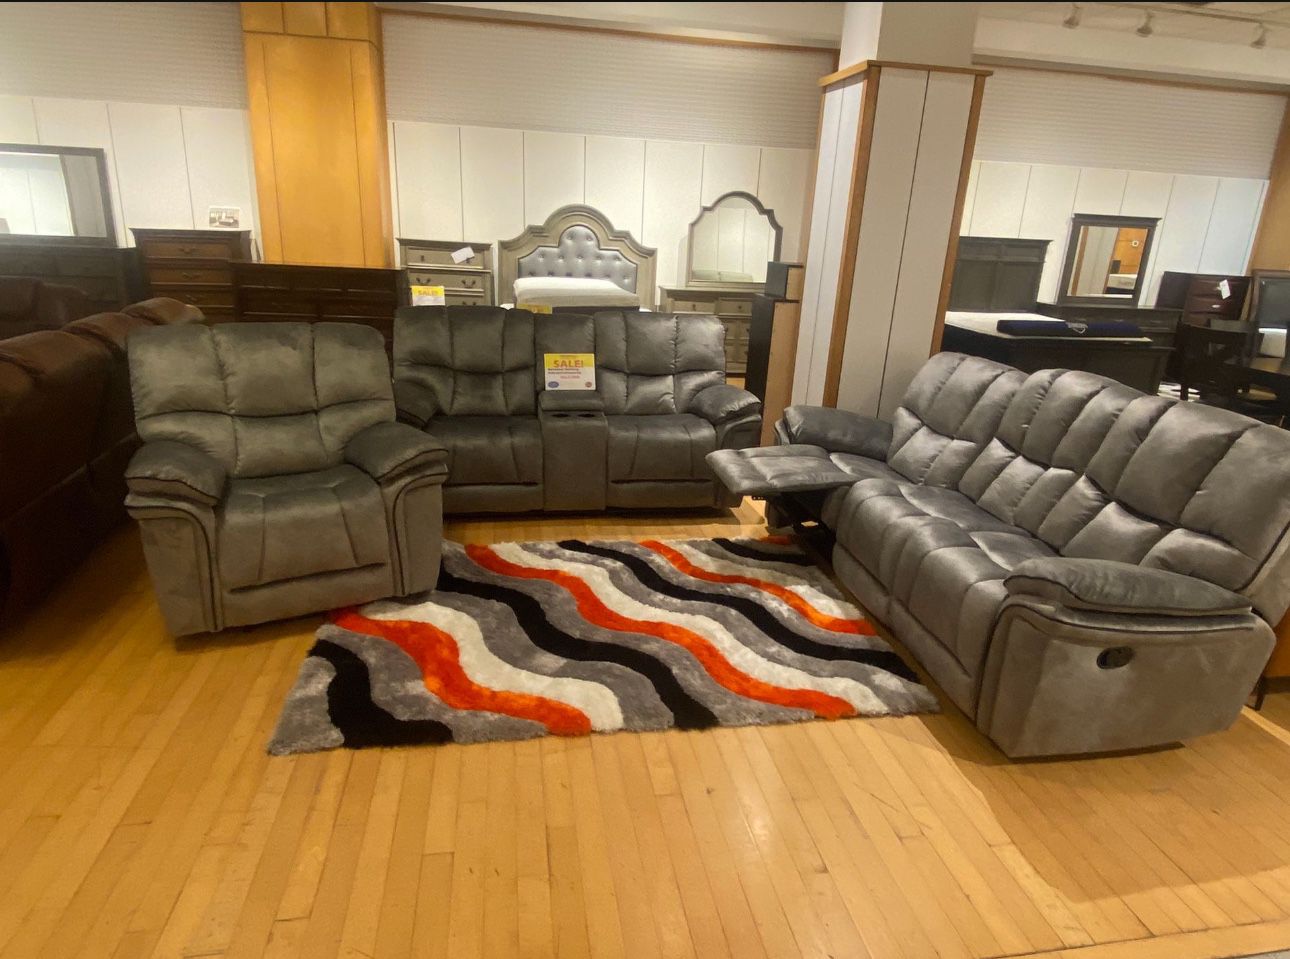 COMFY NEW BARCELONA RECLINING SOFA AND LOVESEAT SET ON SALE ONLY $899. IN STOCK SAME DAY DELIVERY 🚚 EASY FINANCING 